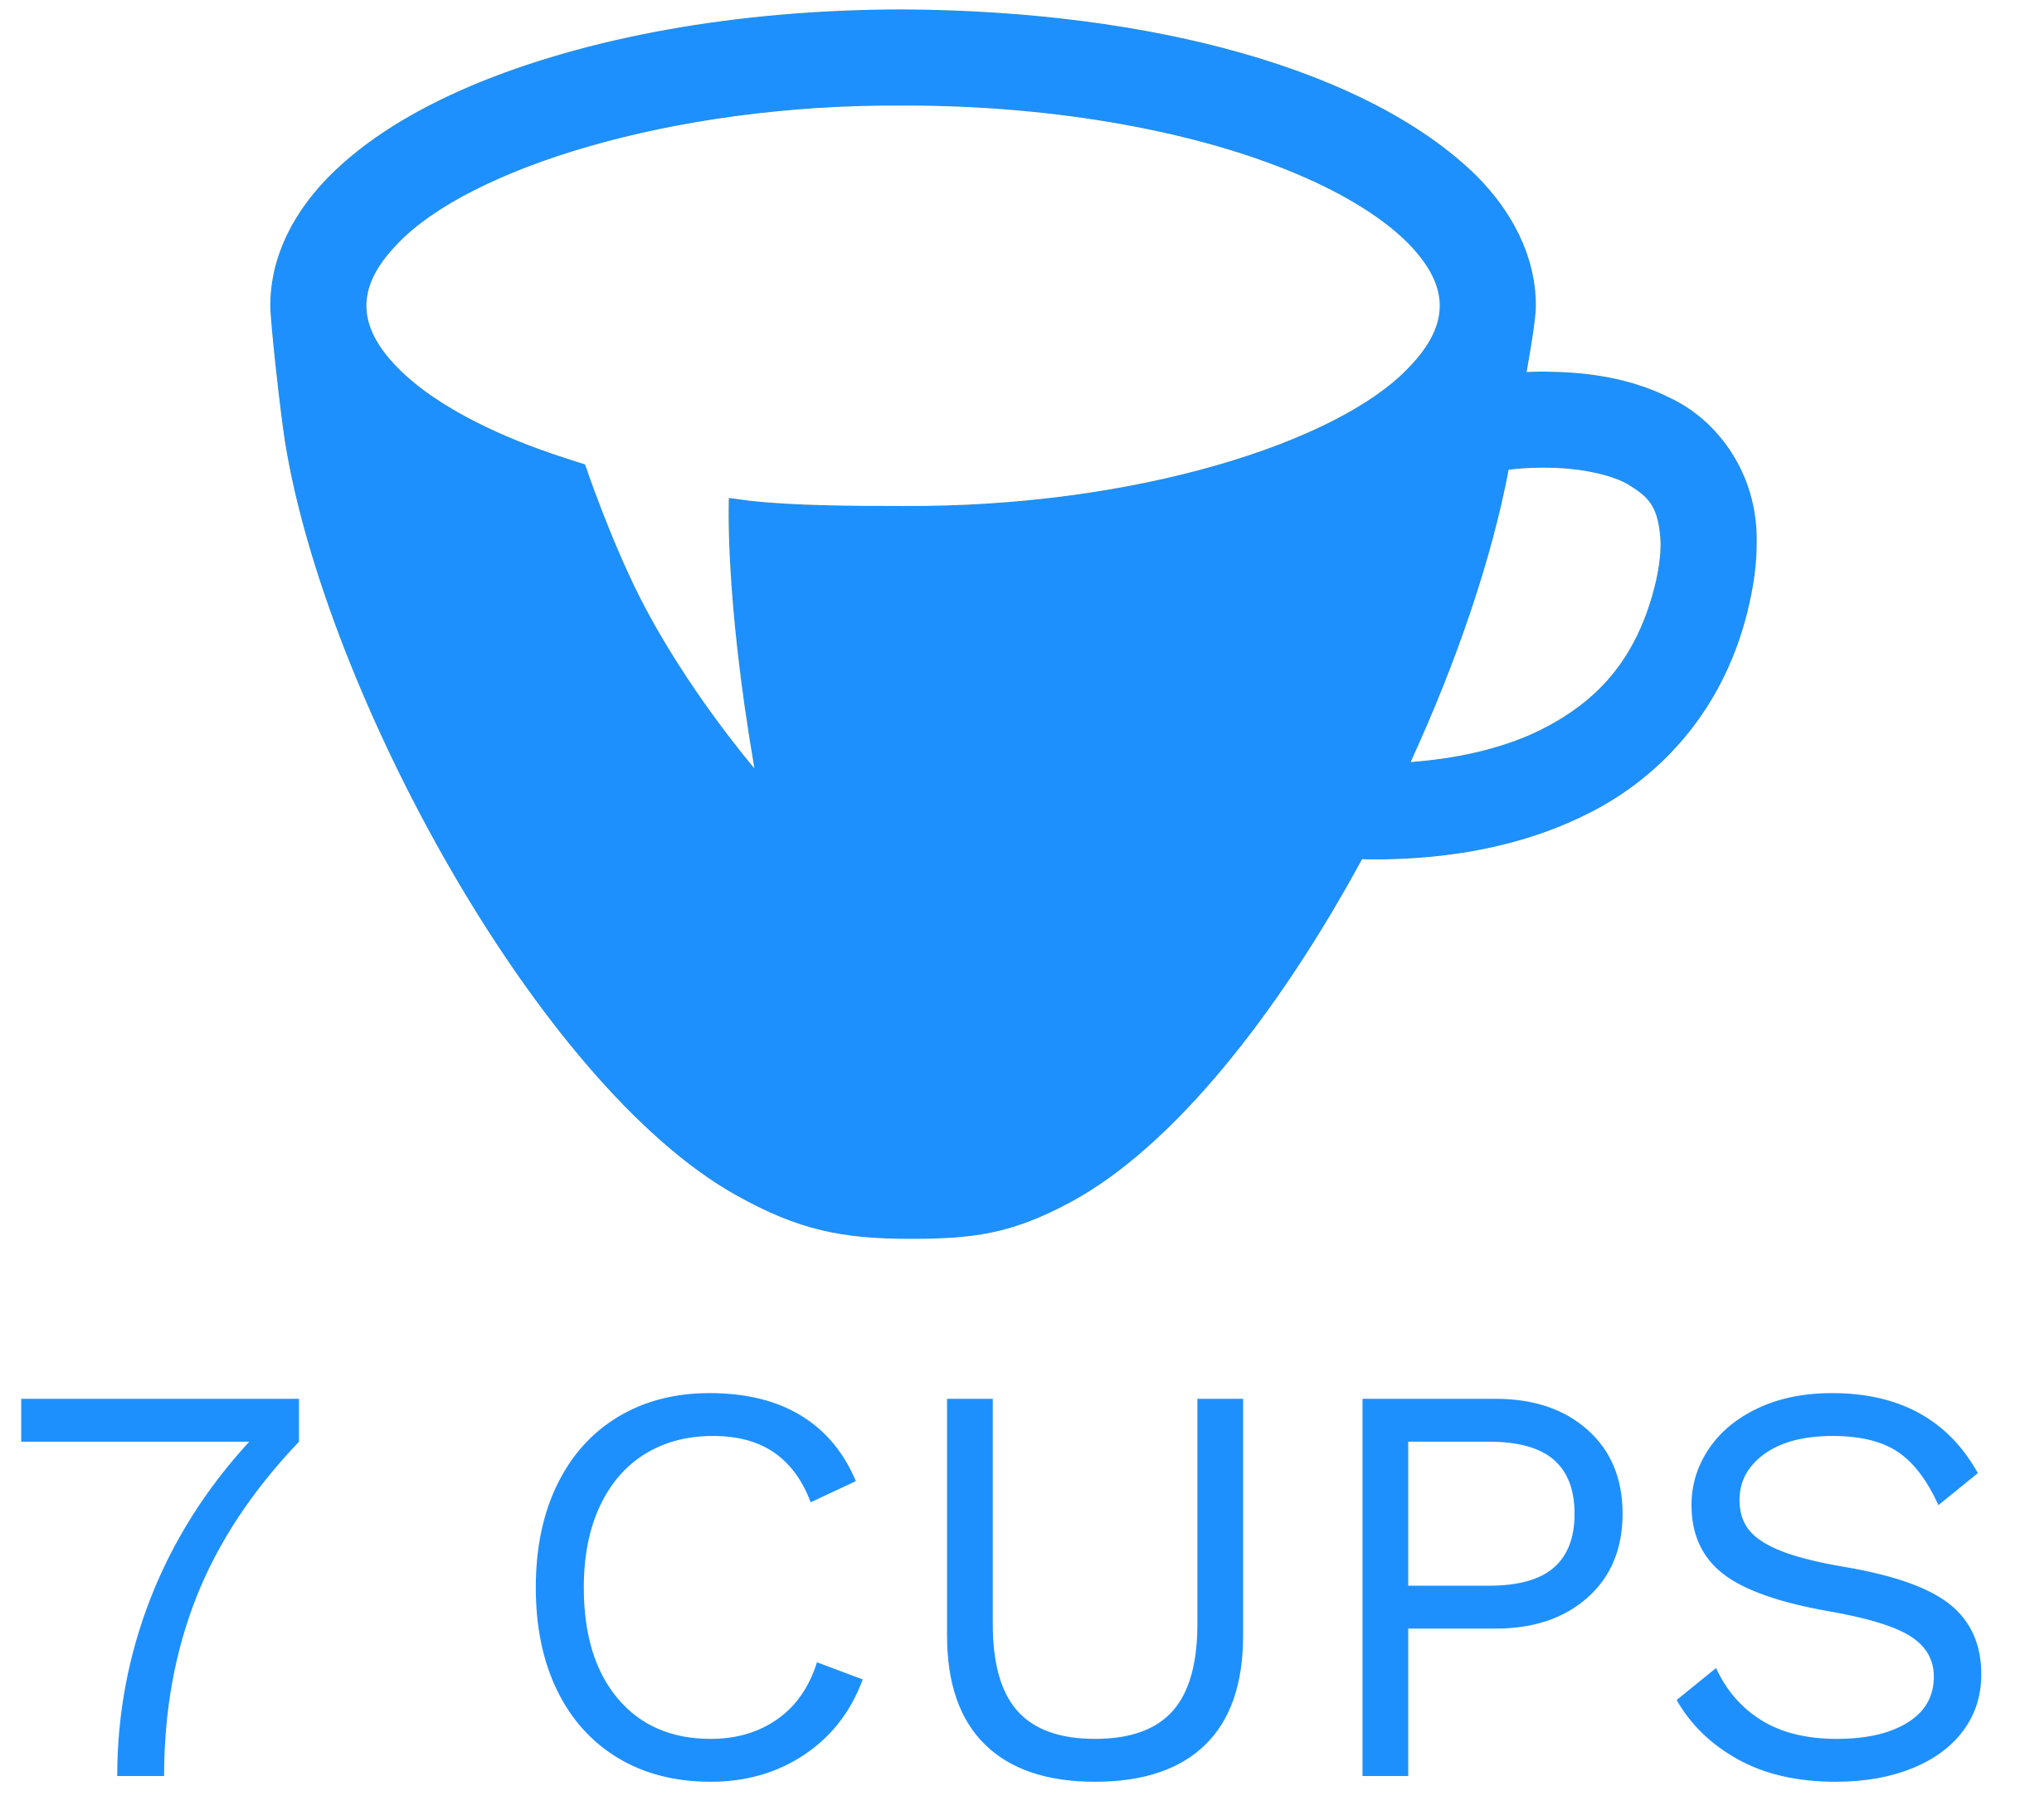 7 Cups